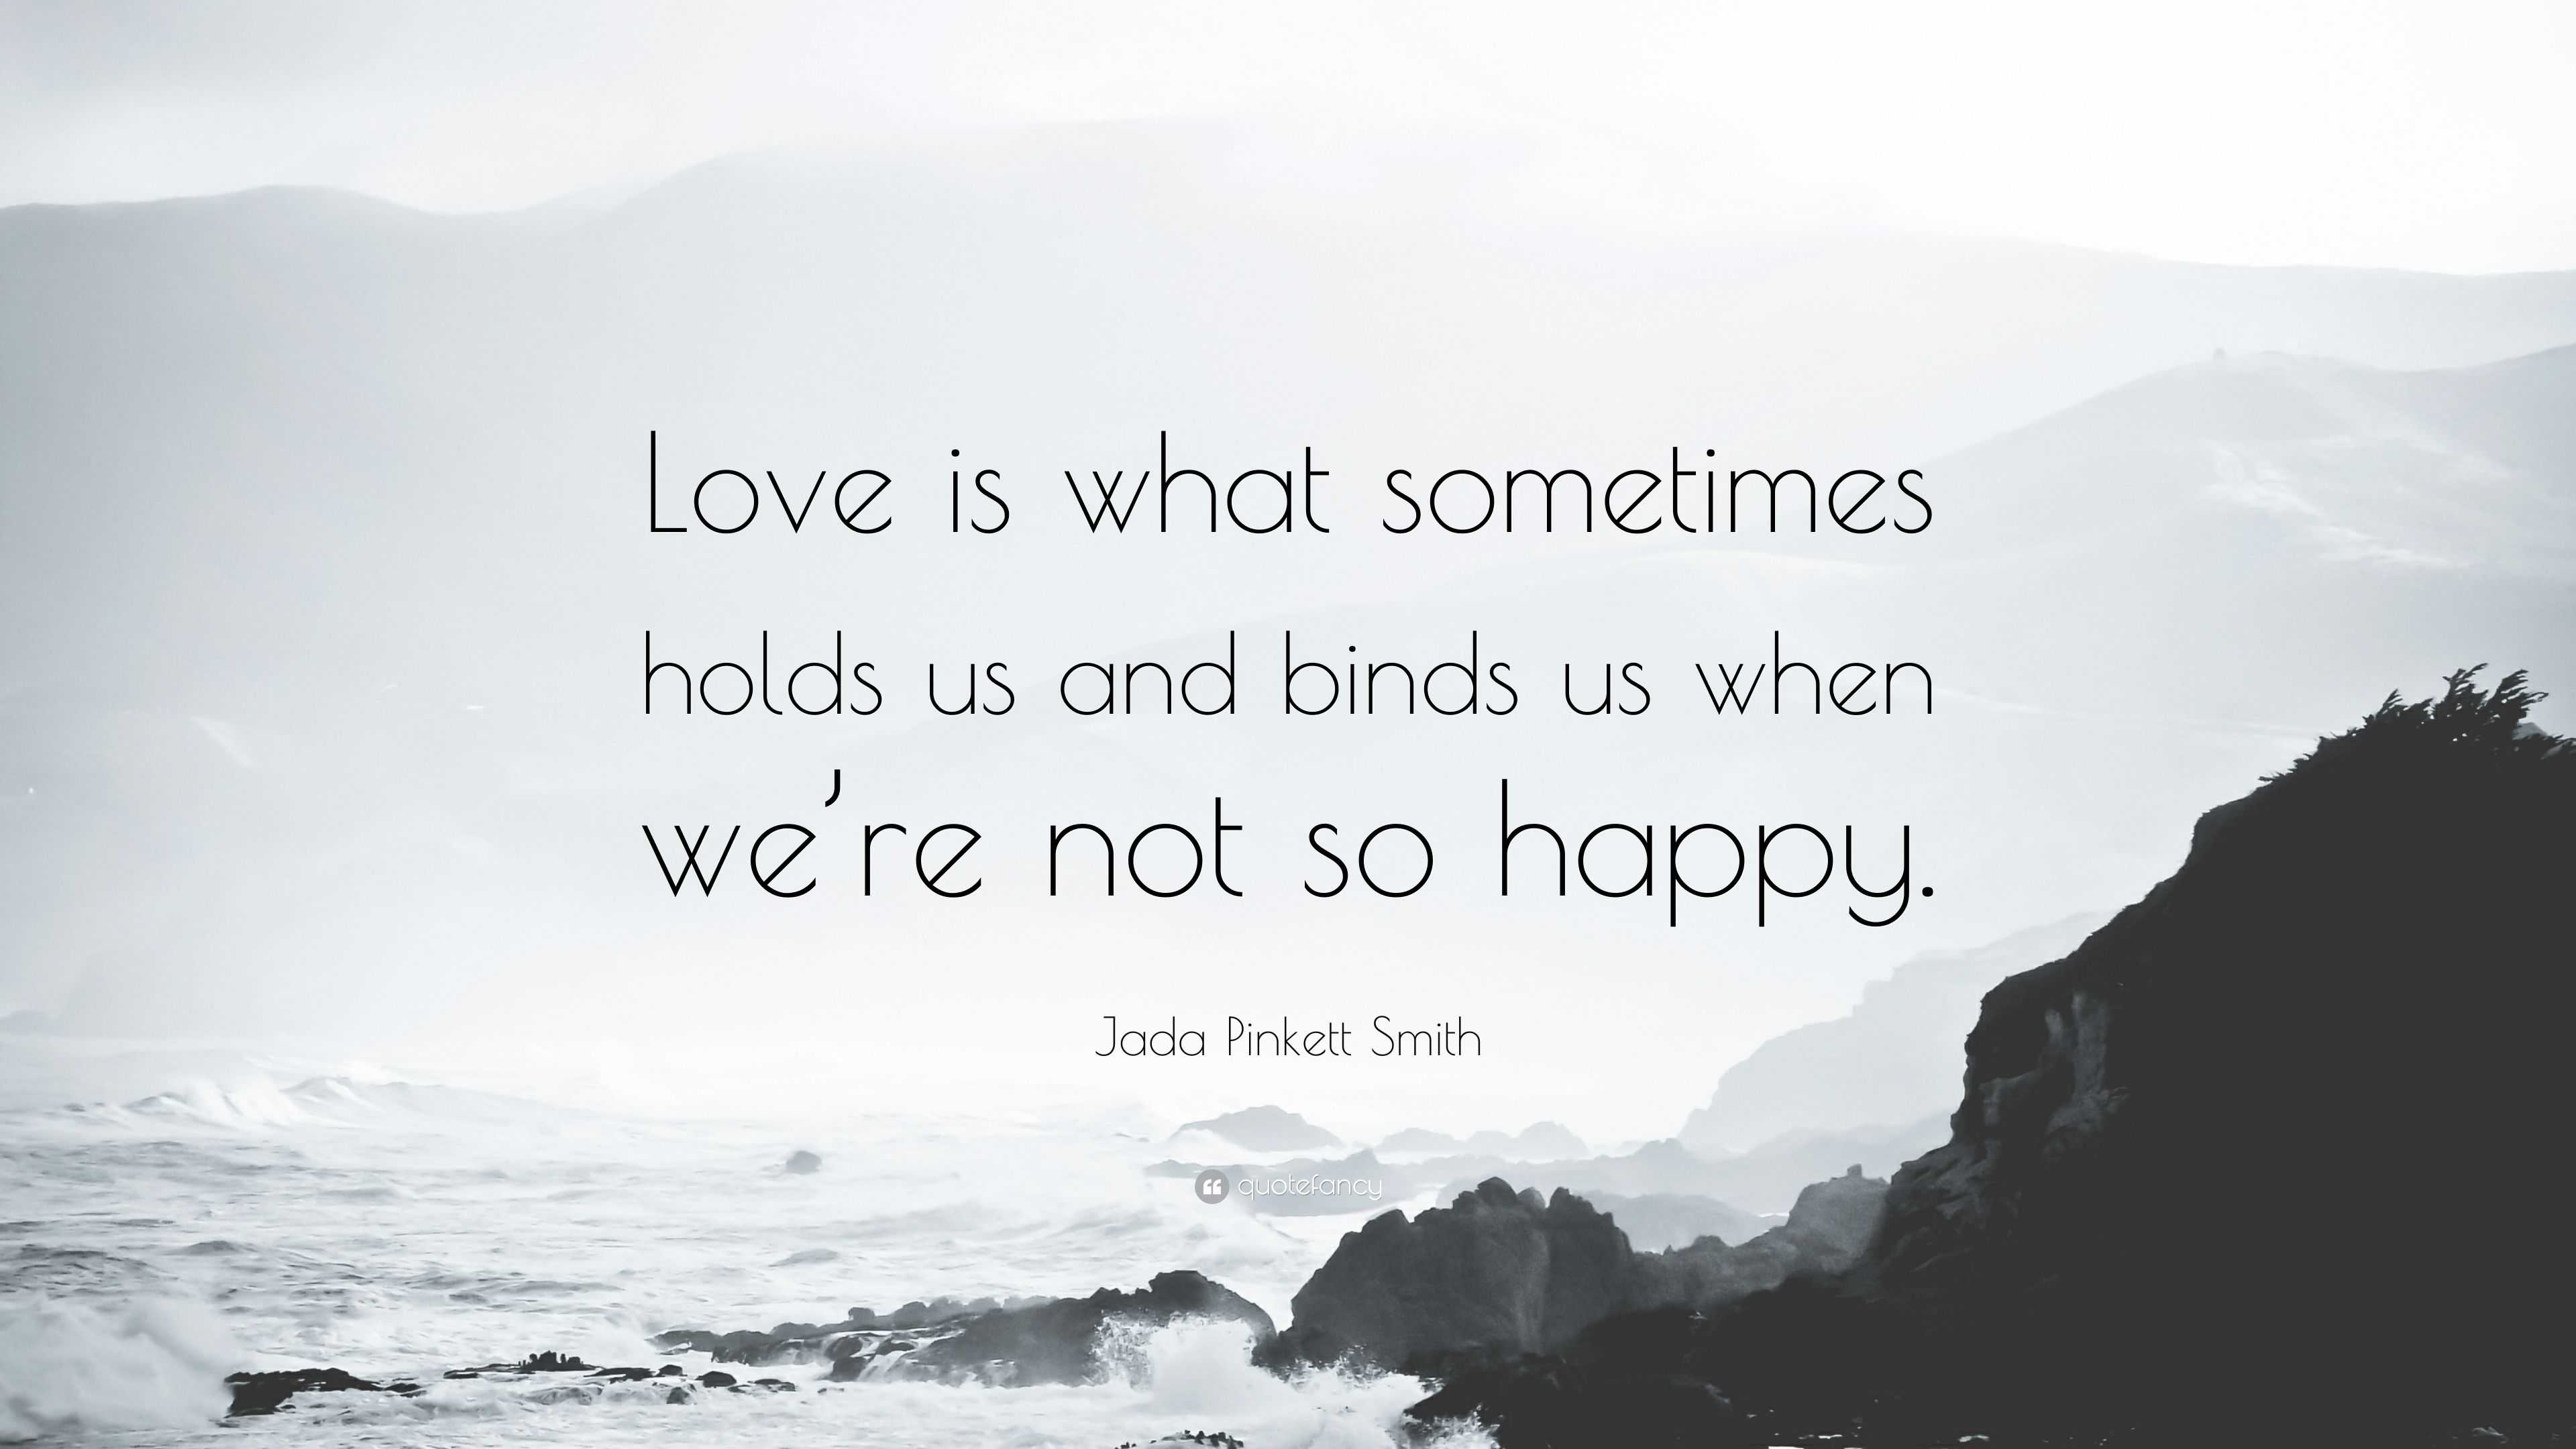 Jada Pinkett Smith Quote Love Is What Sometimes Holds Us And Binds Us When We Re Not So Happy 7 Wallpapers Quotefancy